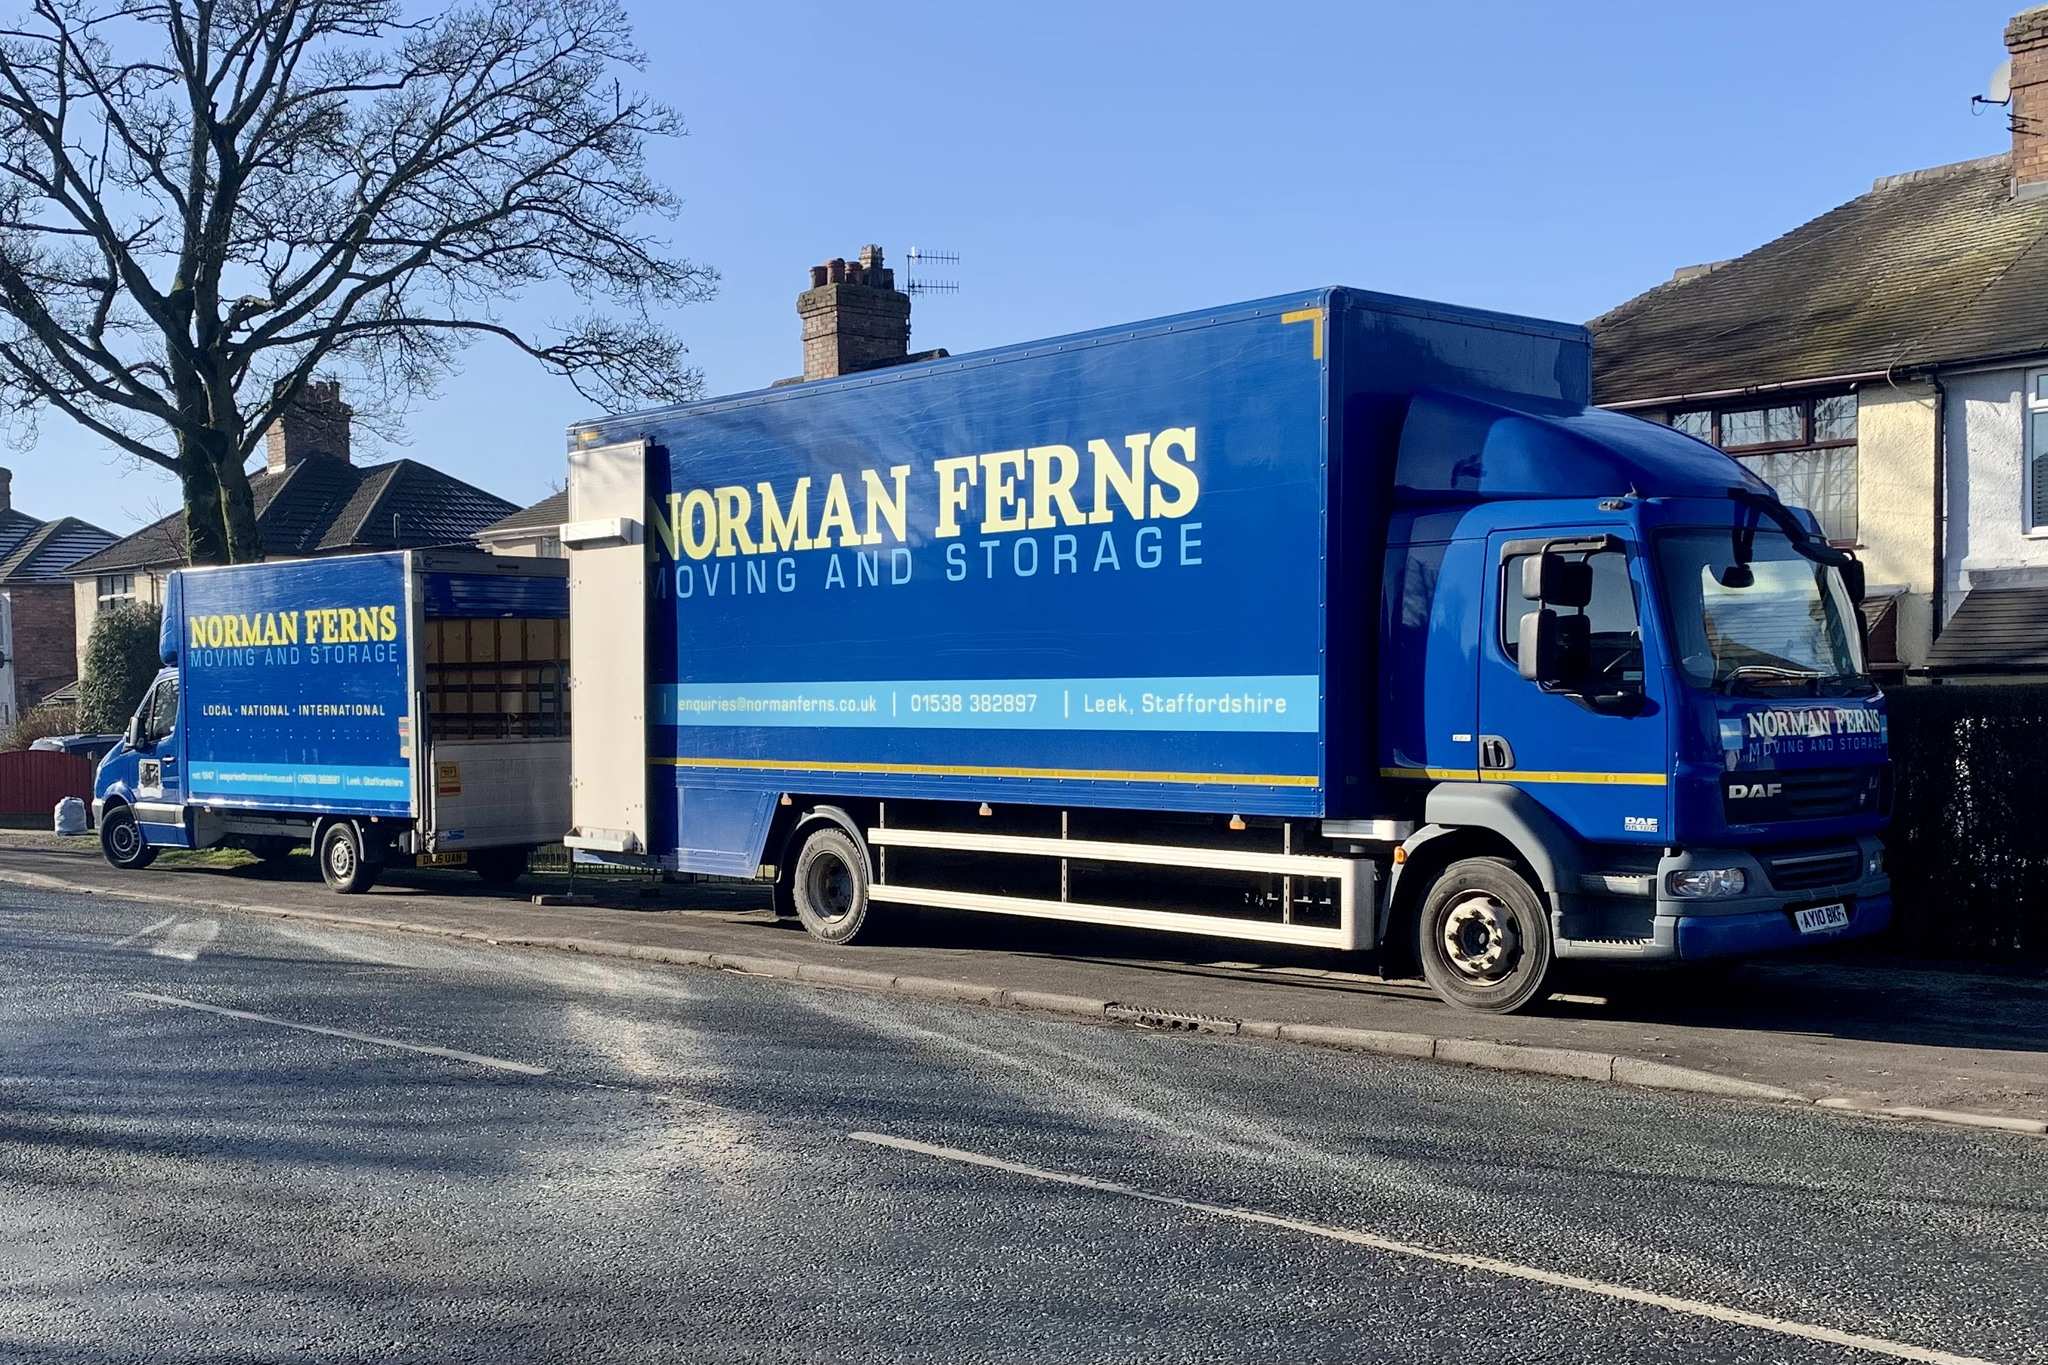 House Removal Trucks